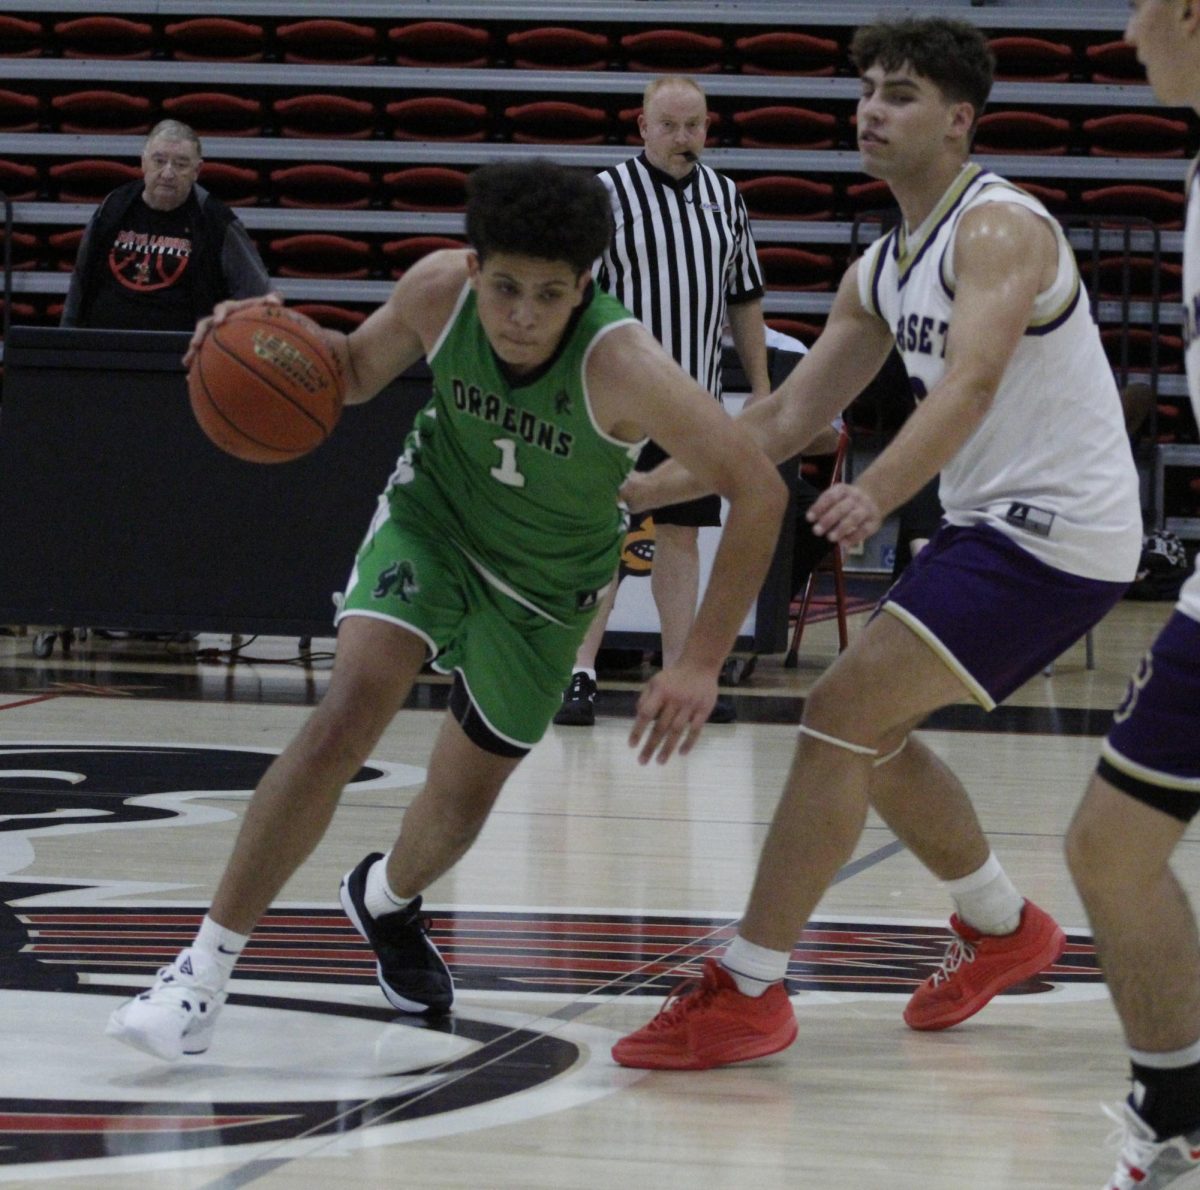 Harlans Kobe Noe worked around a Somerset defender in scrimmage action Friday, Noe scored 14 points in the Dragons 72-44 loss.